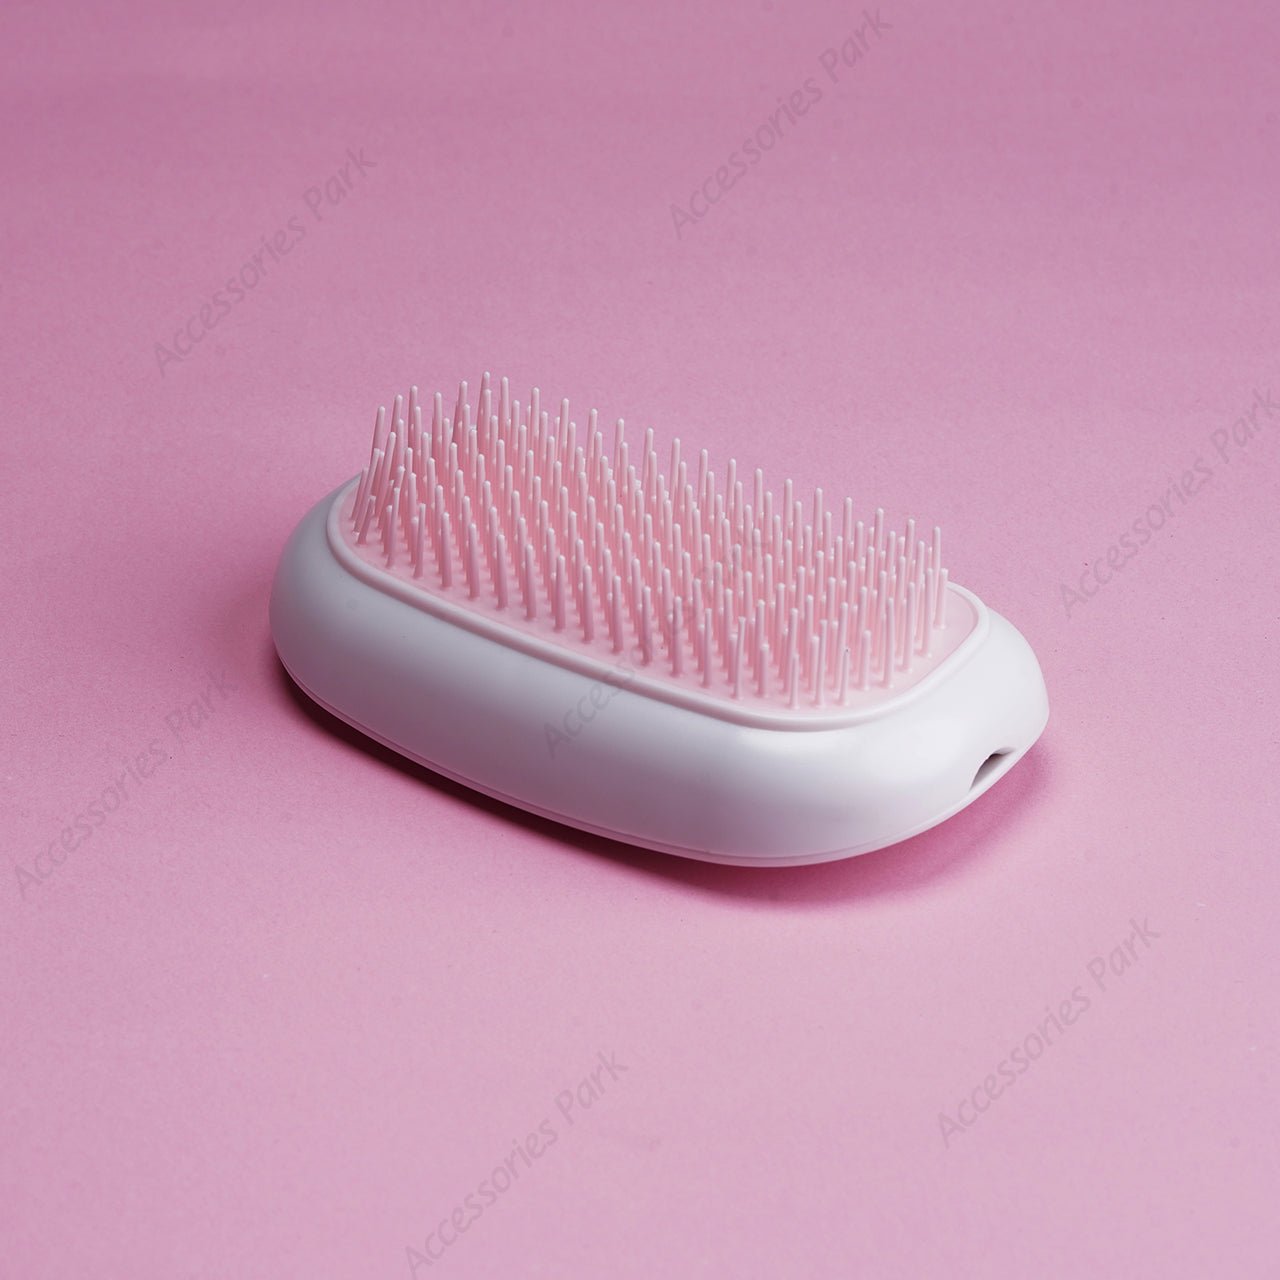 A pink color electric hair brush in white body